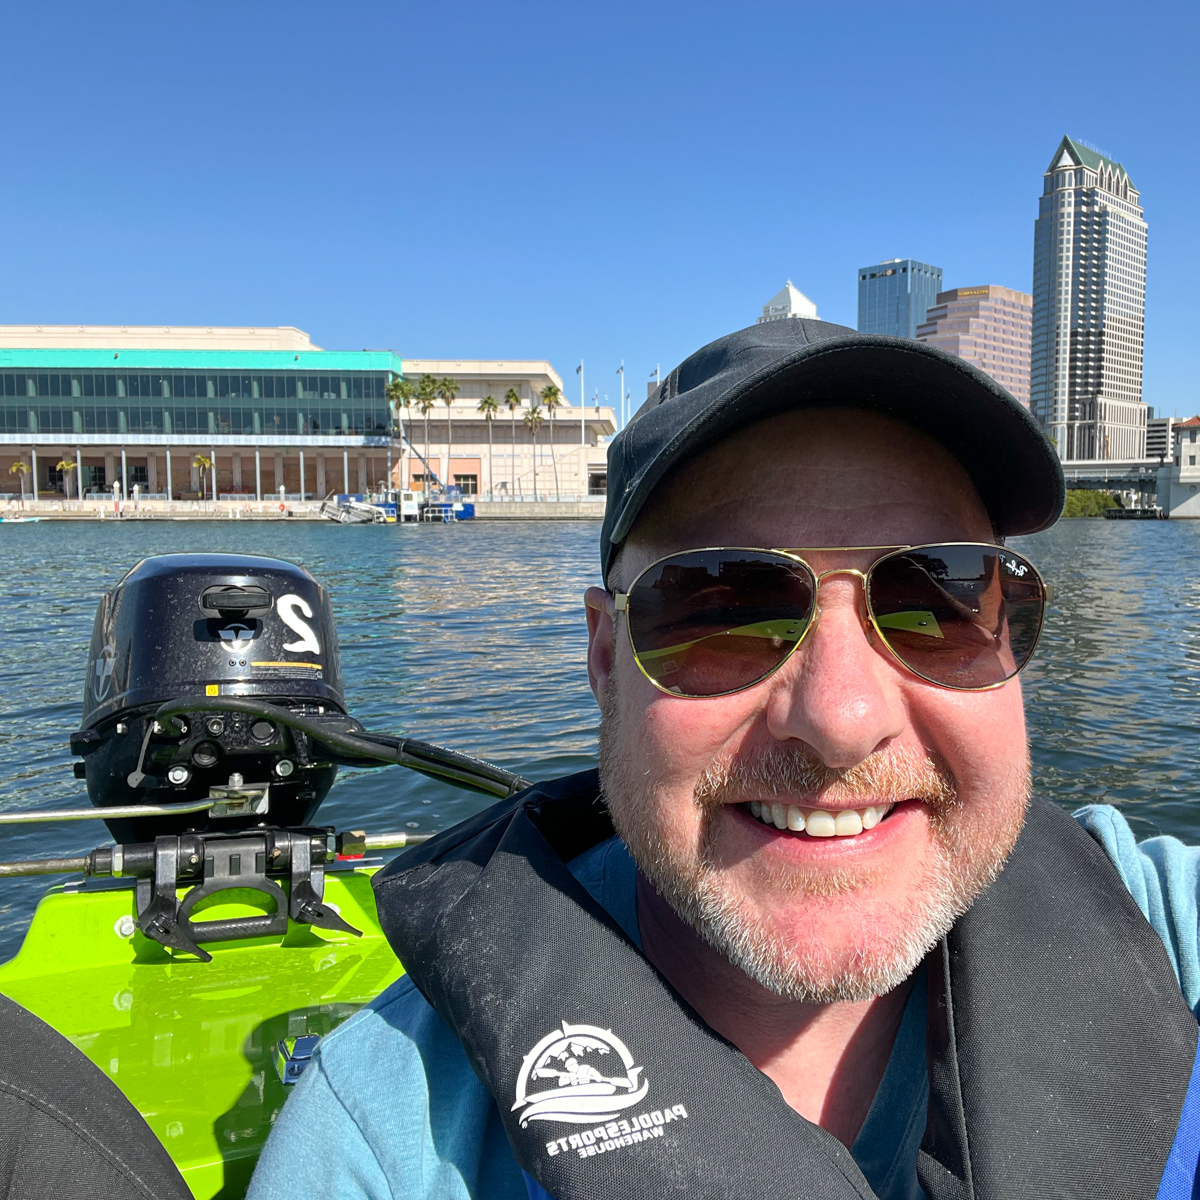 Dave driving a motorboat in Tampa Bay, Florida